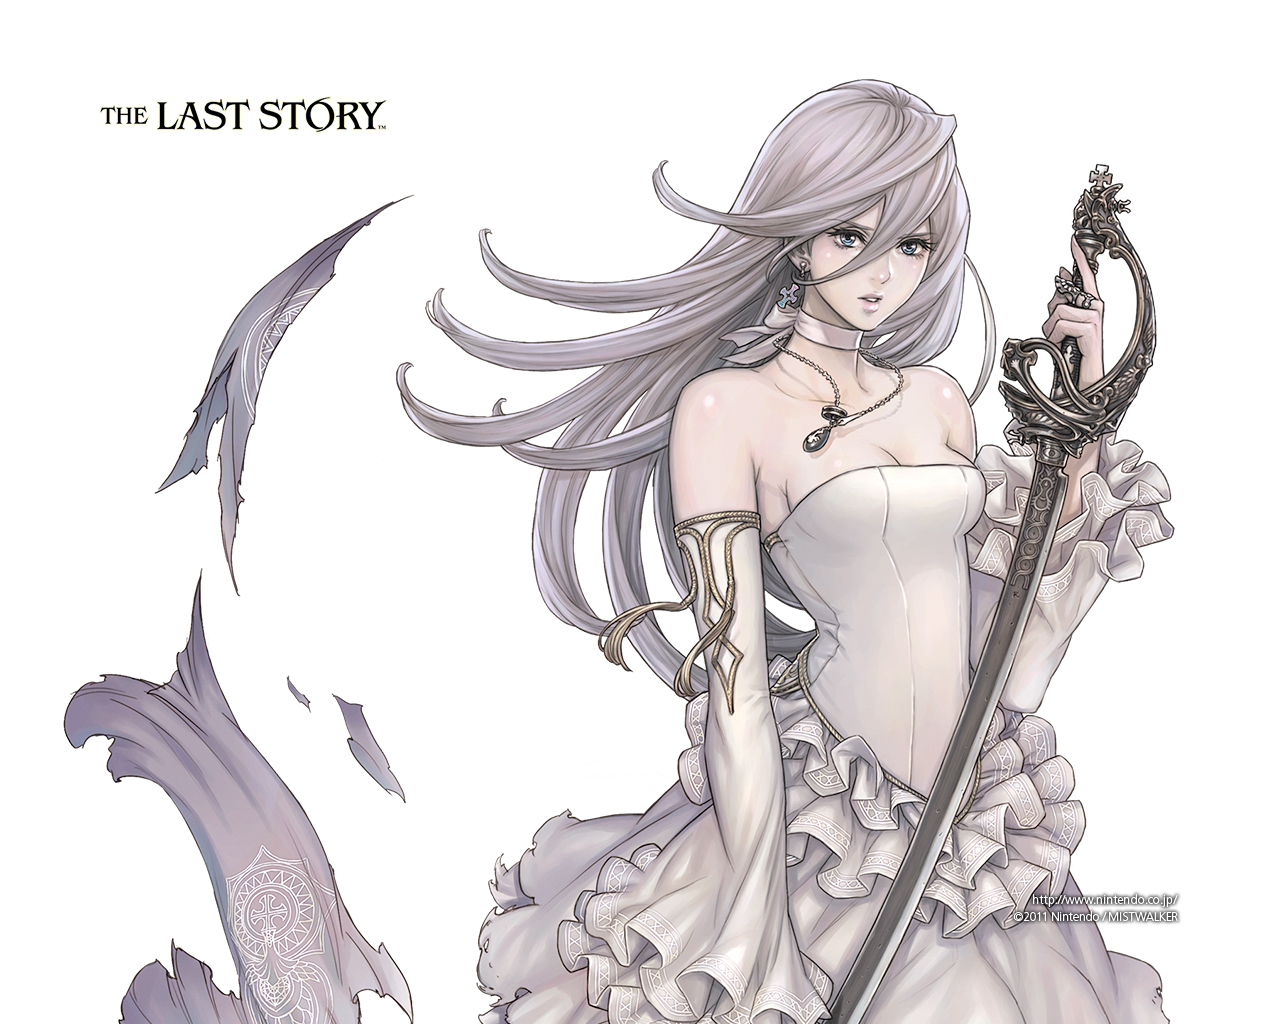 The Last Story Fiche RPG reviews previews wallpapers videos